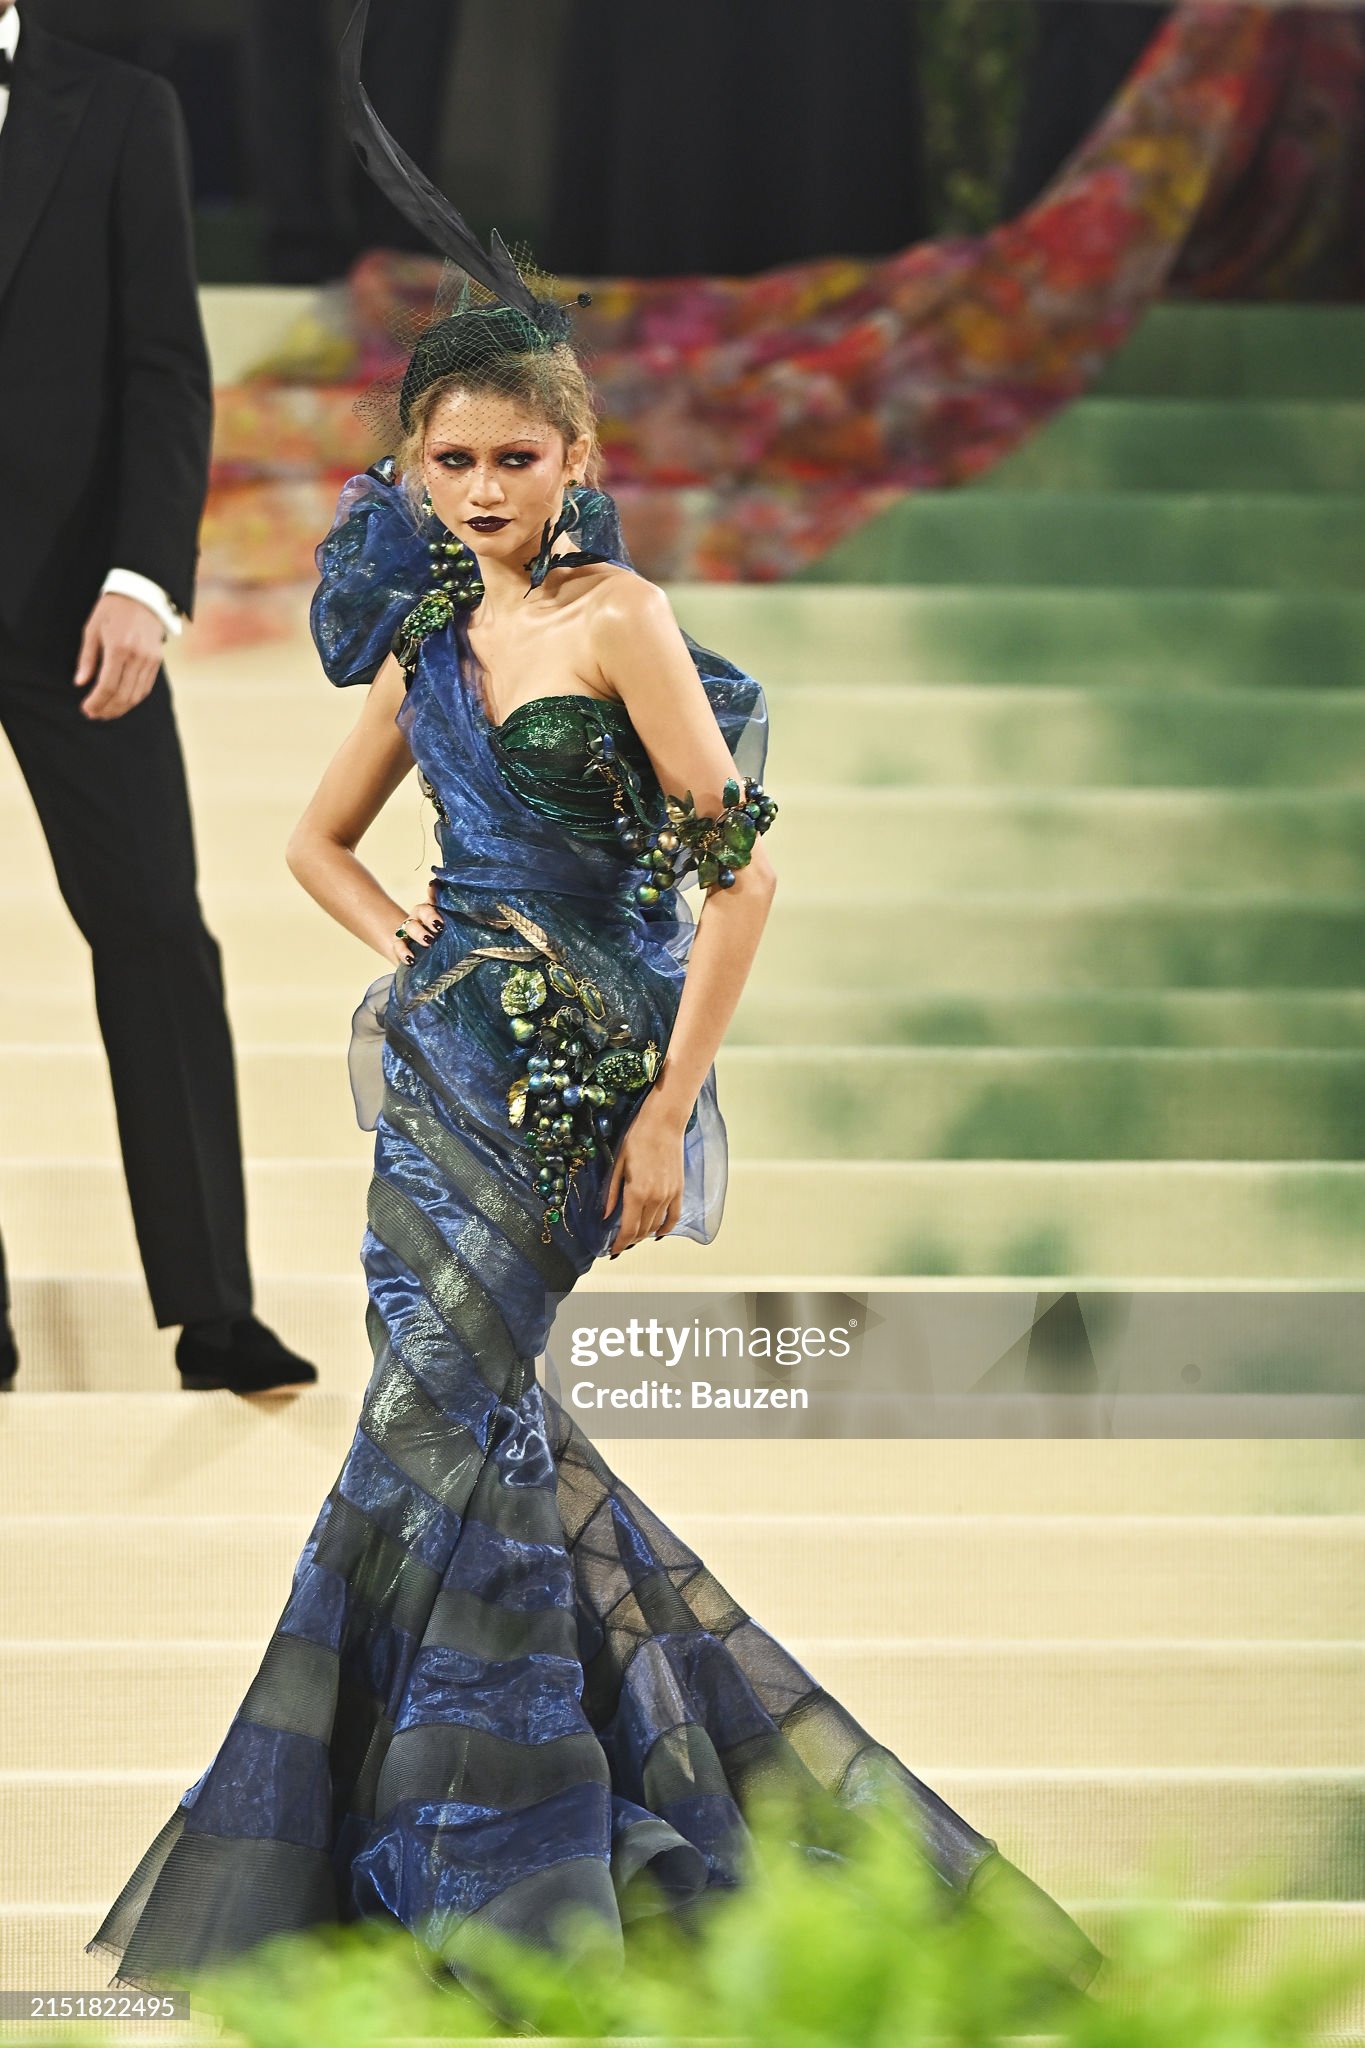 gettyimages-2151822495-2048x2048.jpg